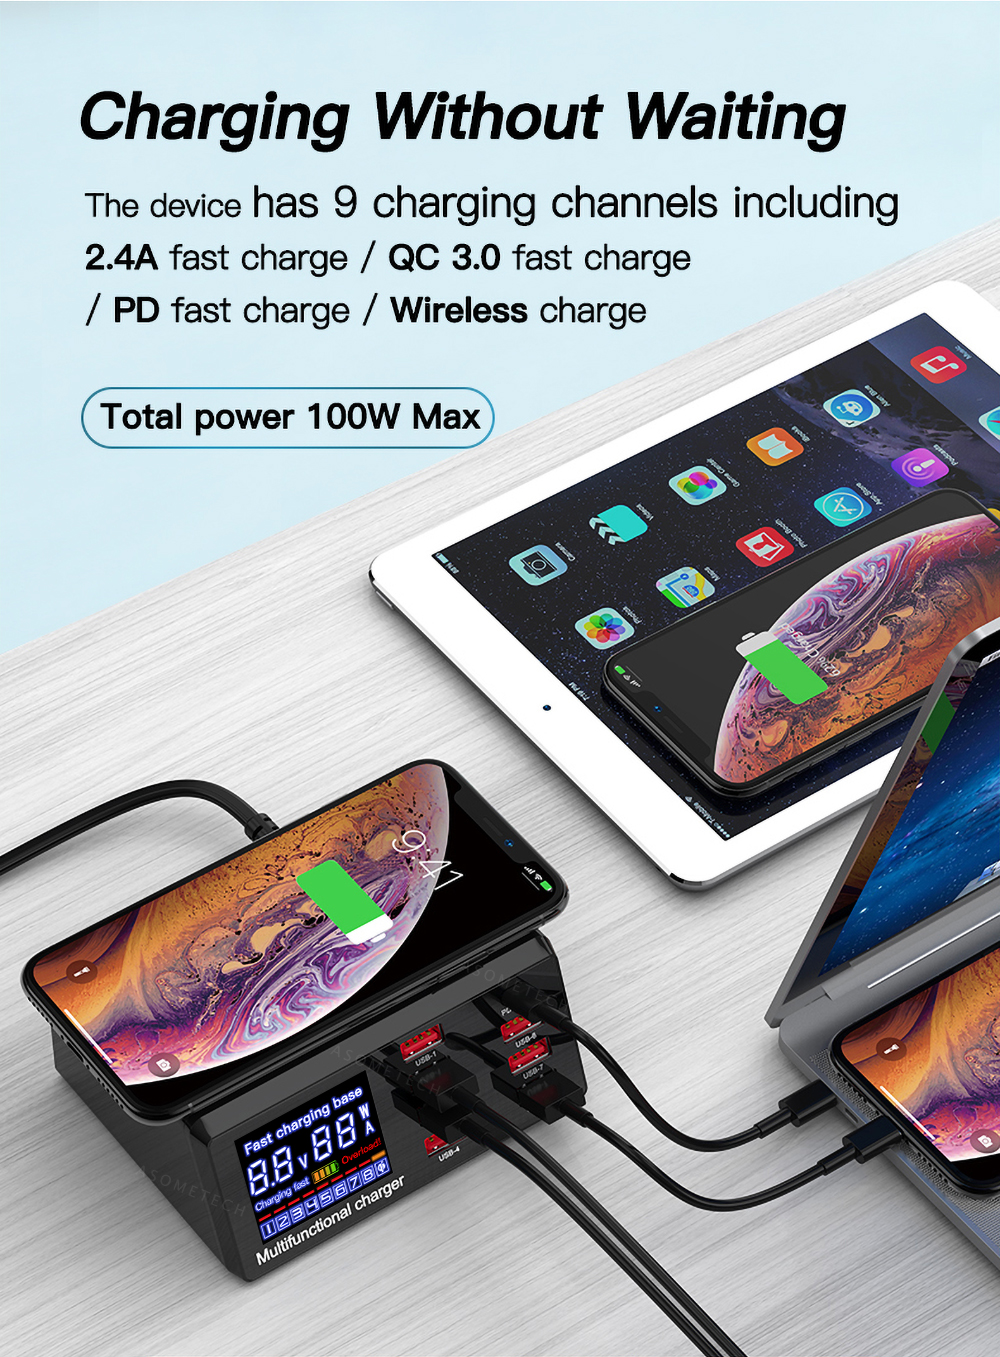 Bakeey-100W-8-Port-USB-PD-Charger-PD30-QC30-Desktop-Charging-Station-Smart-Charger-10W-Wireless-Char-1716456-9